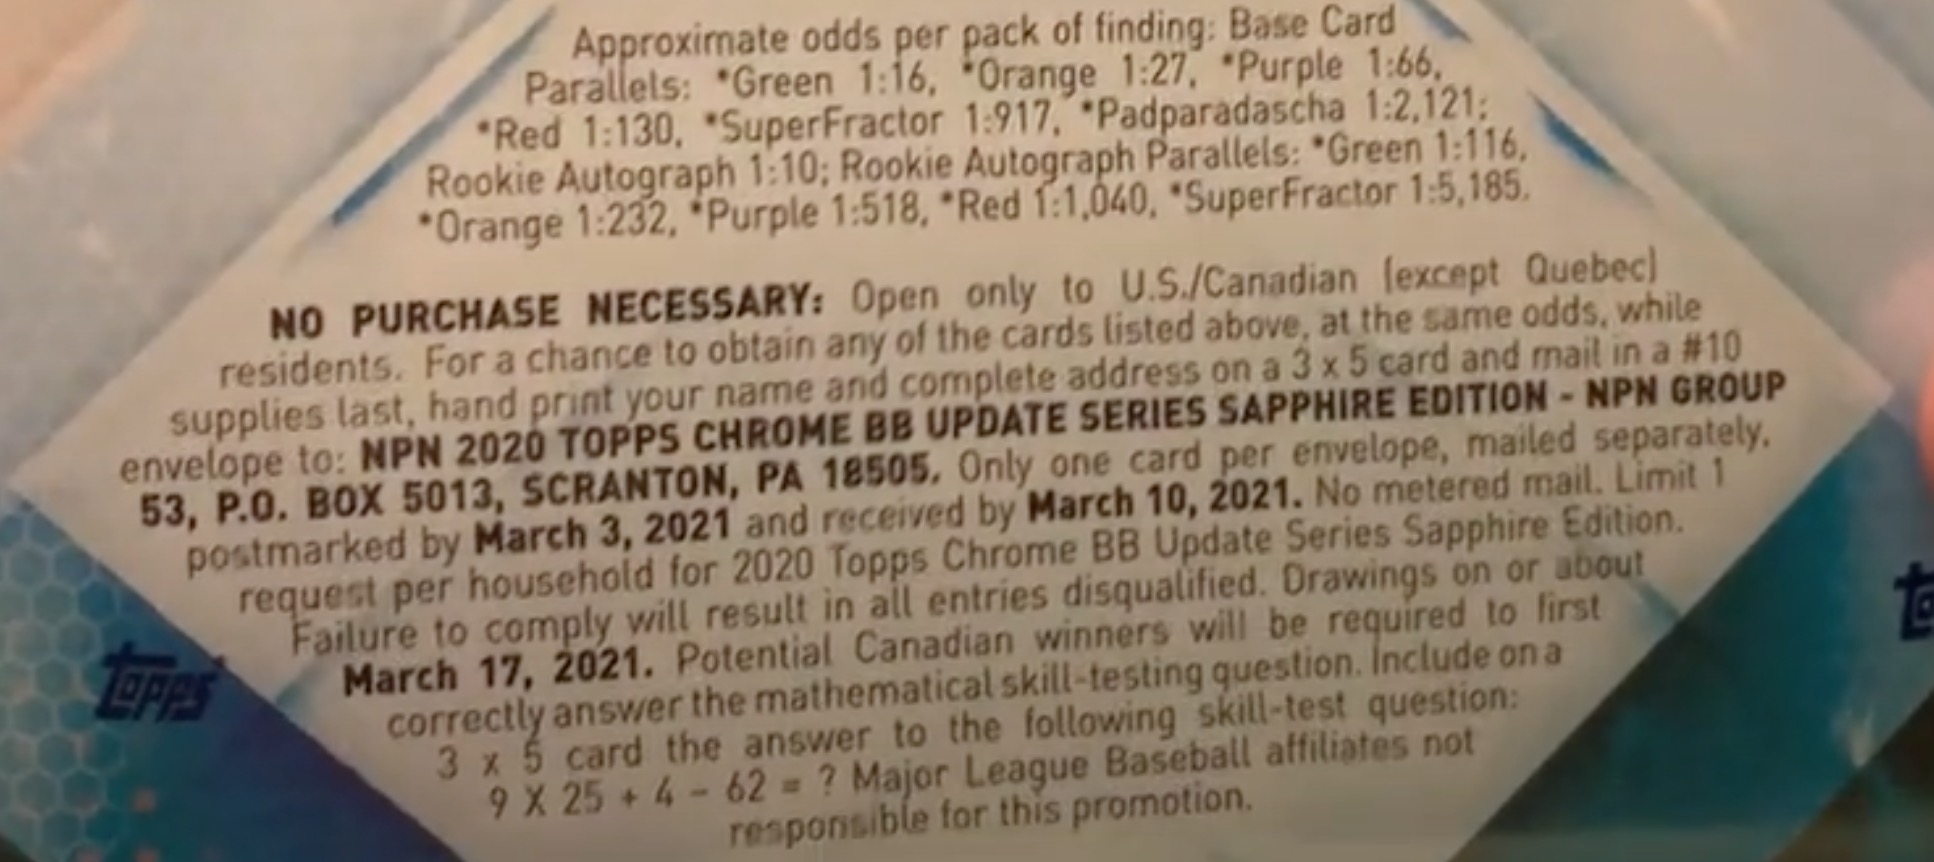 2020 Topps Chrome Update Series Sapphire Edition Baseball Cards - Hobby Box - No Purchase Necessary (NPN) Information